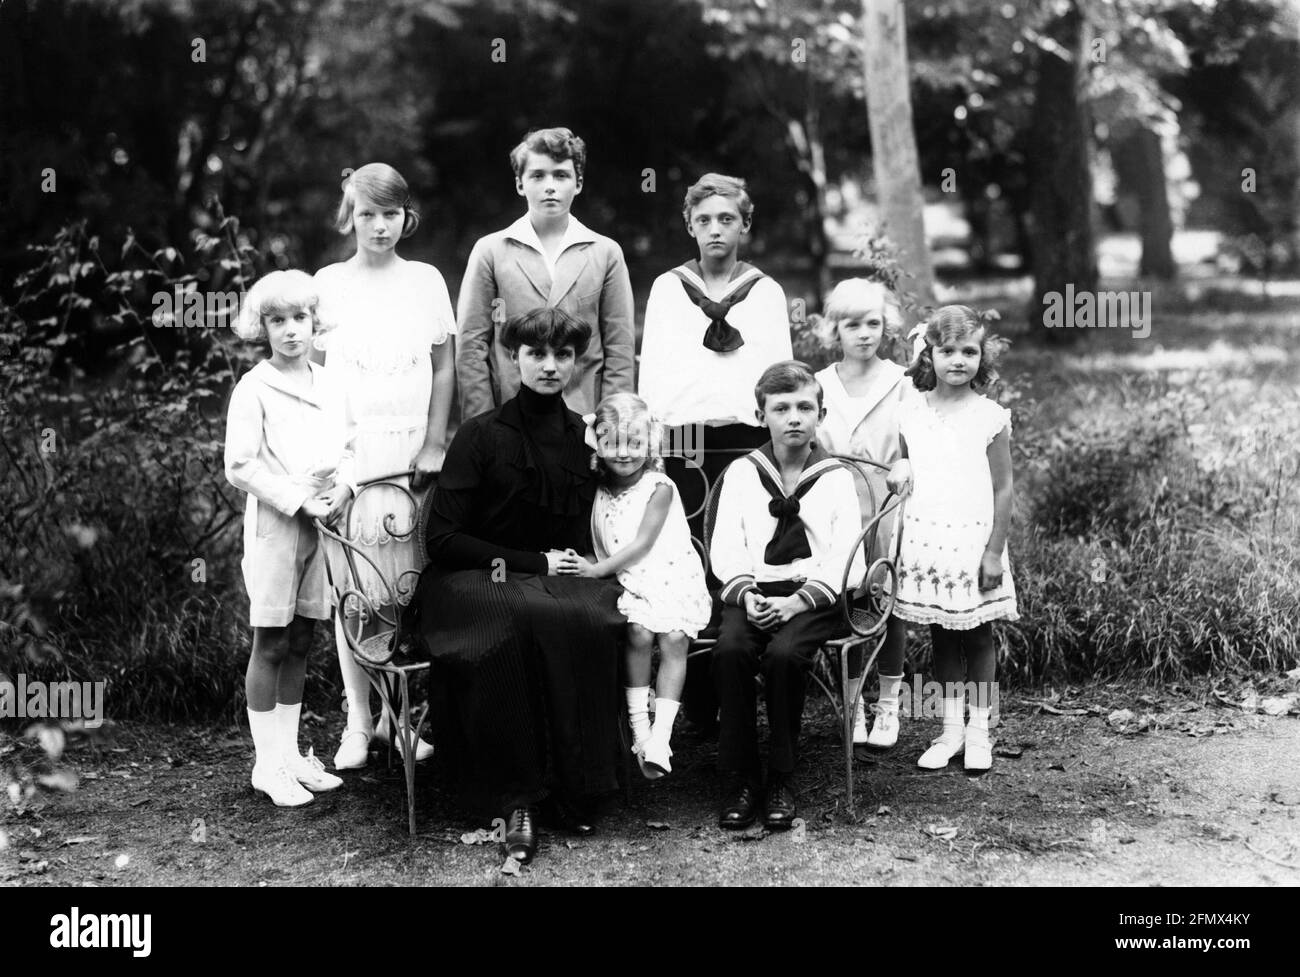 Zita von Bourbon Parma, 9.5.1892 - 14.3.1989, wife of Emperor Charles I of Austria, group picture, ADDITIONAL-RIGHTS-CLEARANCE-INFO-NOT-AVAILABLE Stock Photo